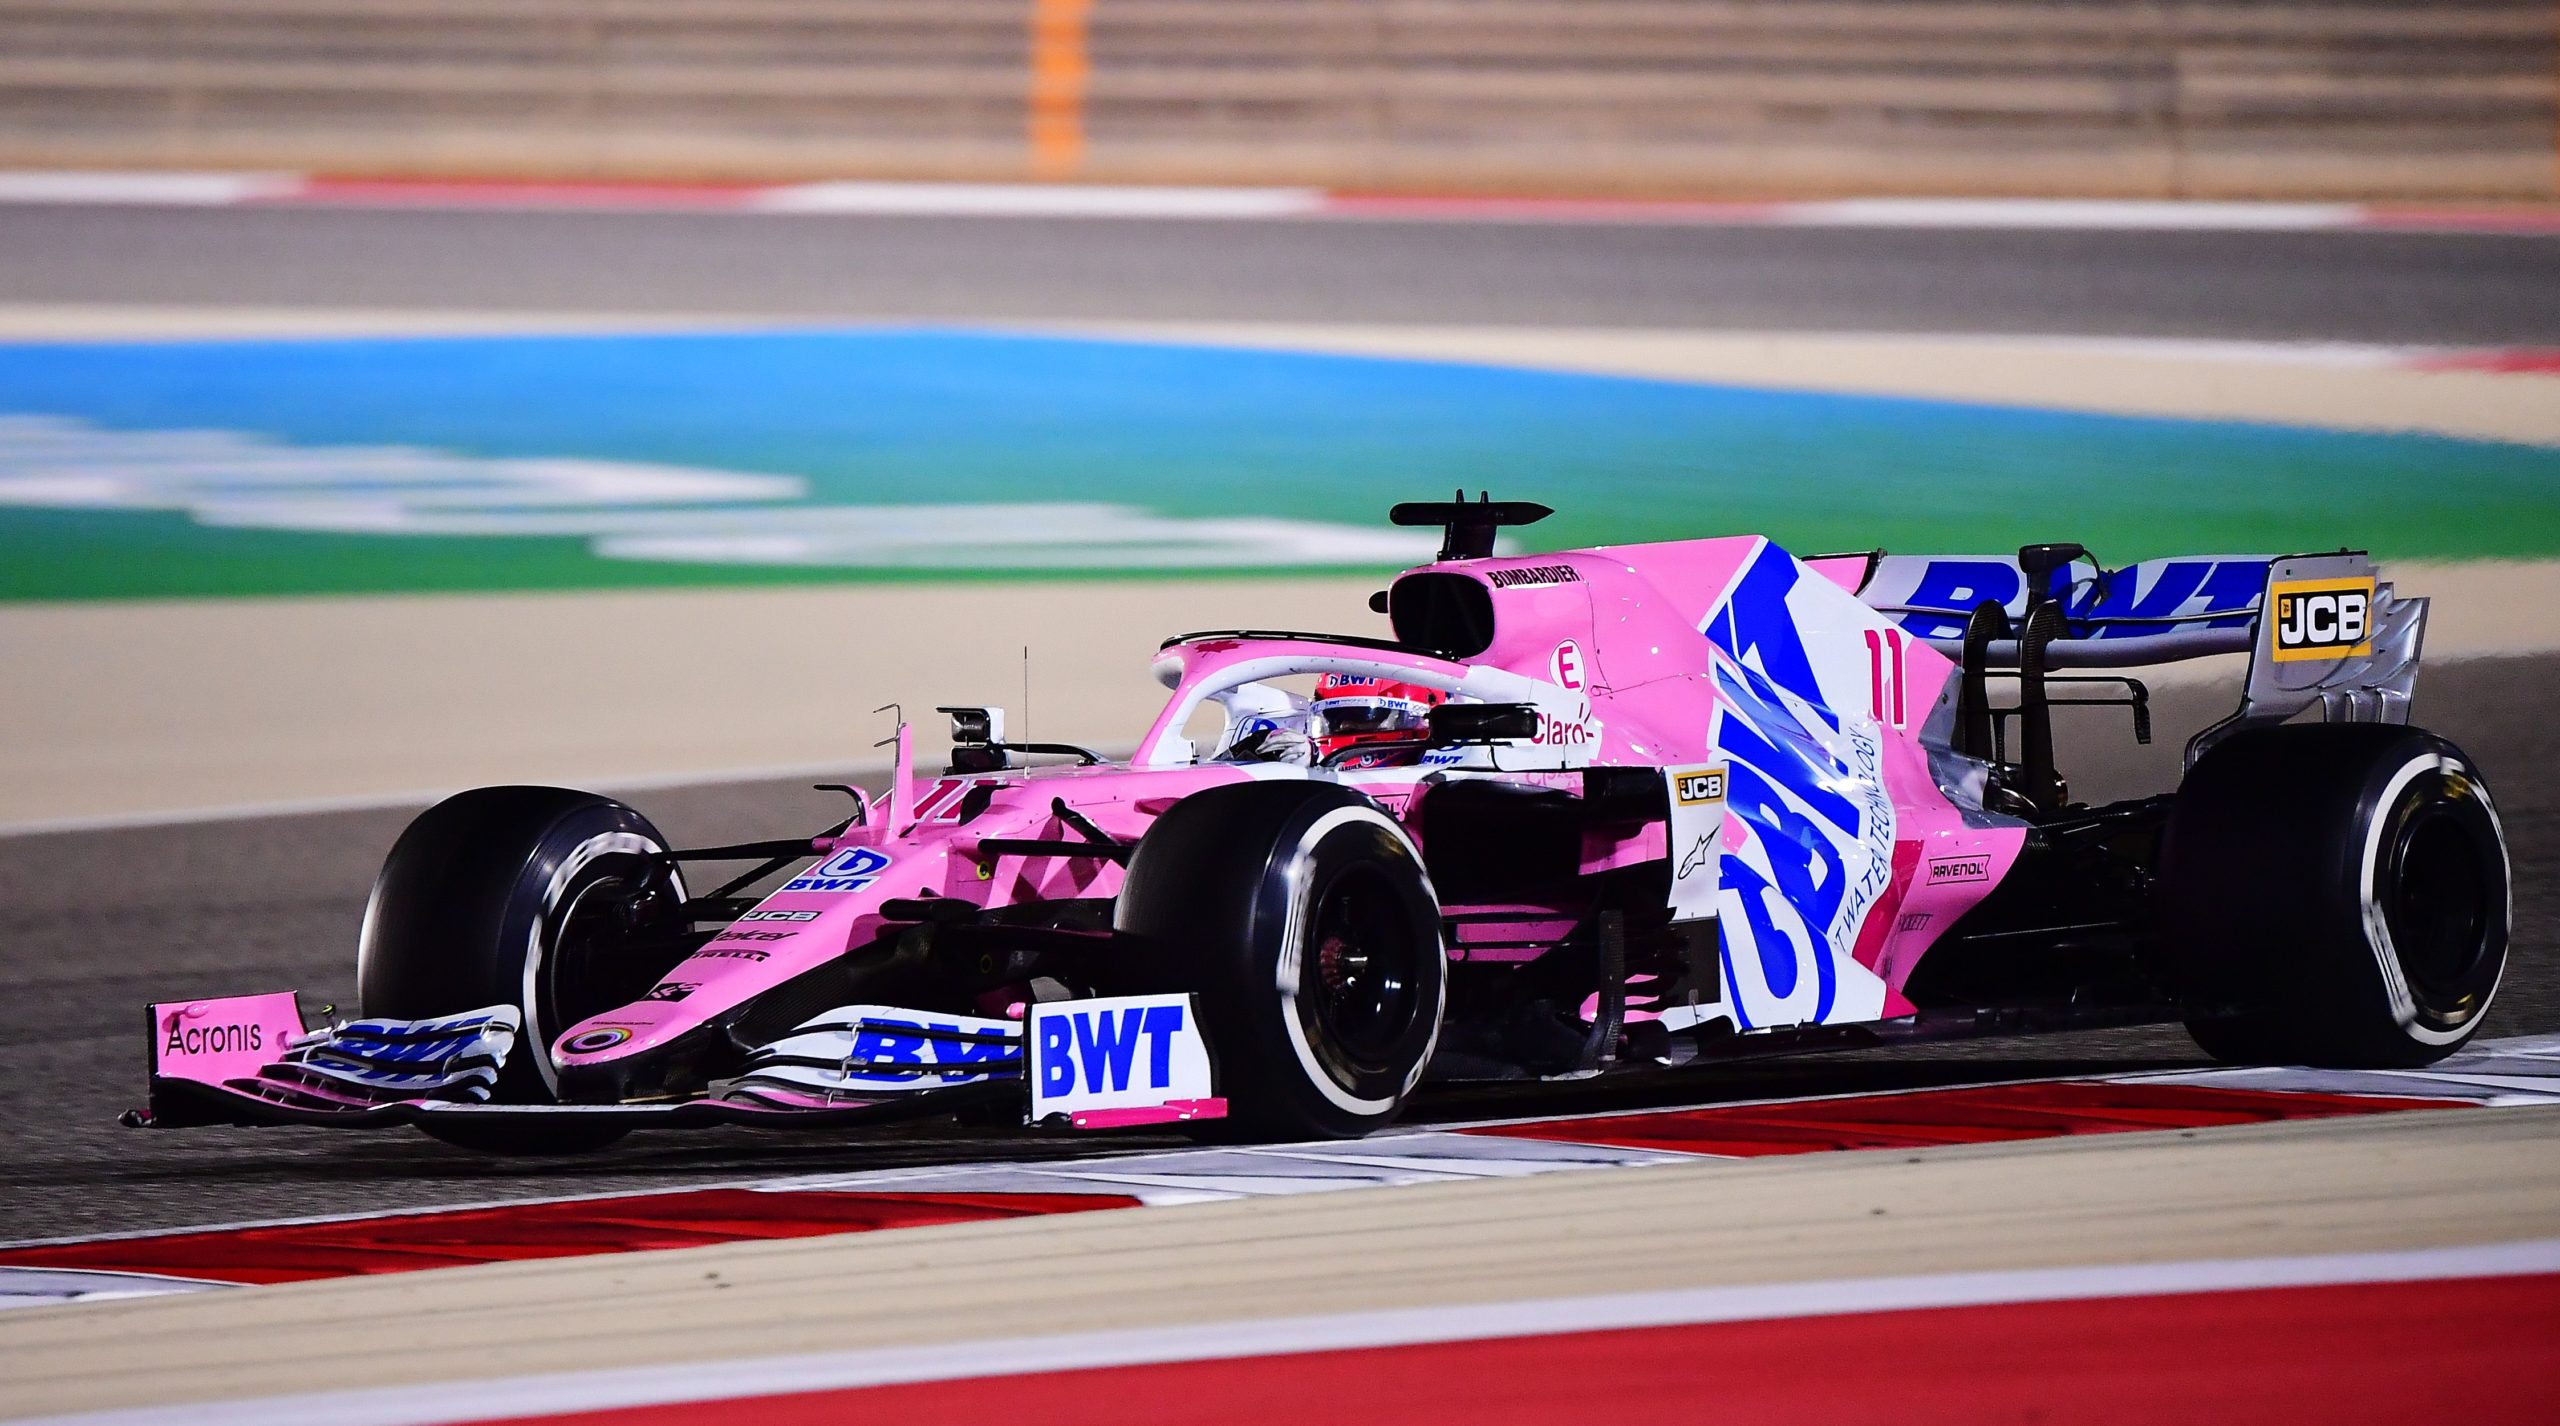 Perez to receive a grid penalty for engine change in Abu Dhabi